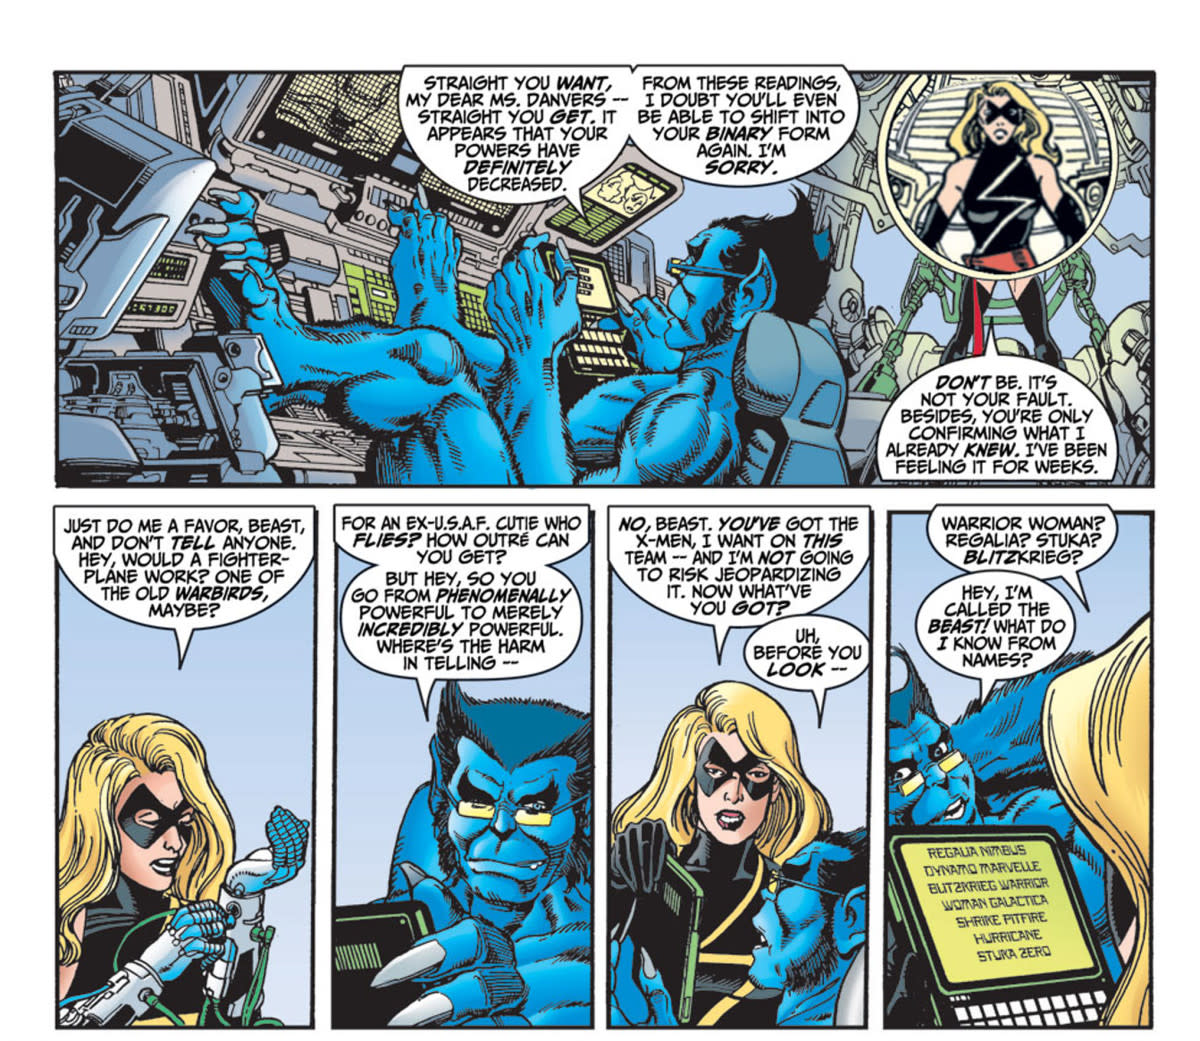 Beast confirms that Carol Danvers' powers have been reduced and that she can no longer manifest into her Binary form. Thus, a new name is in order. (Panels from Avengers #4 1998).